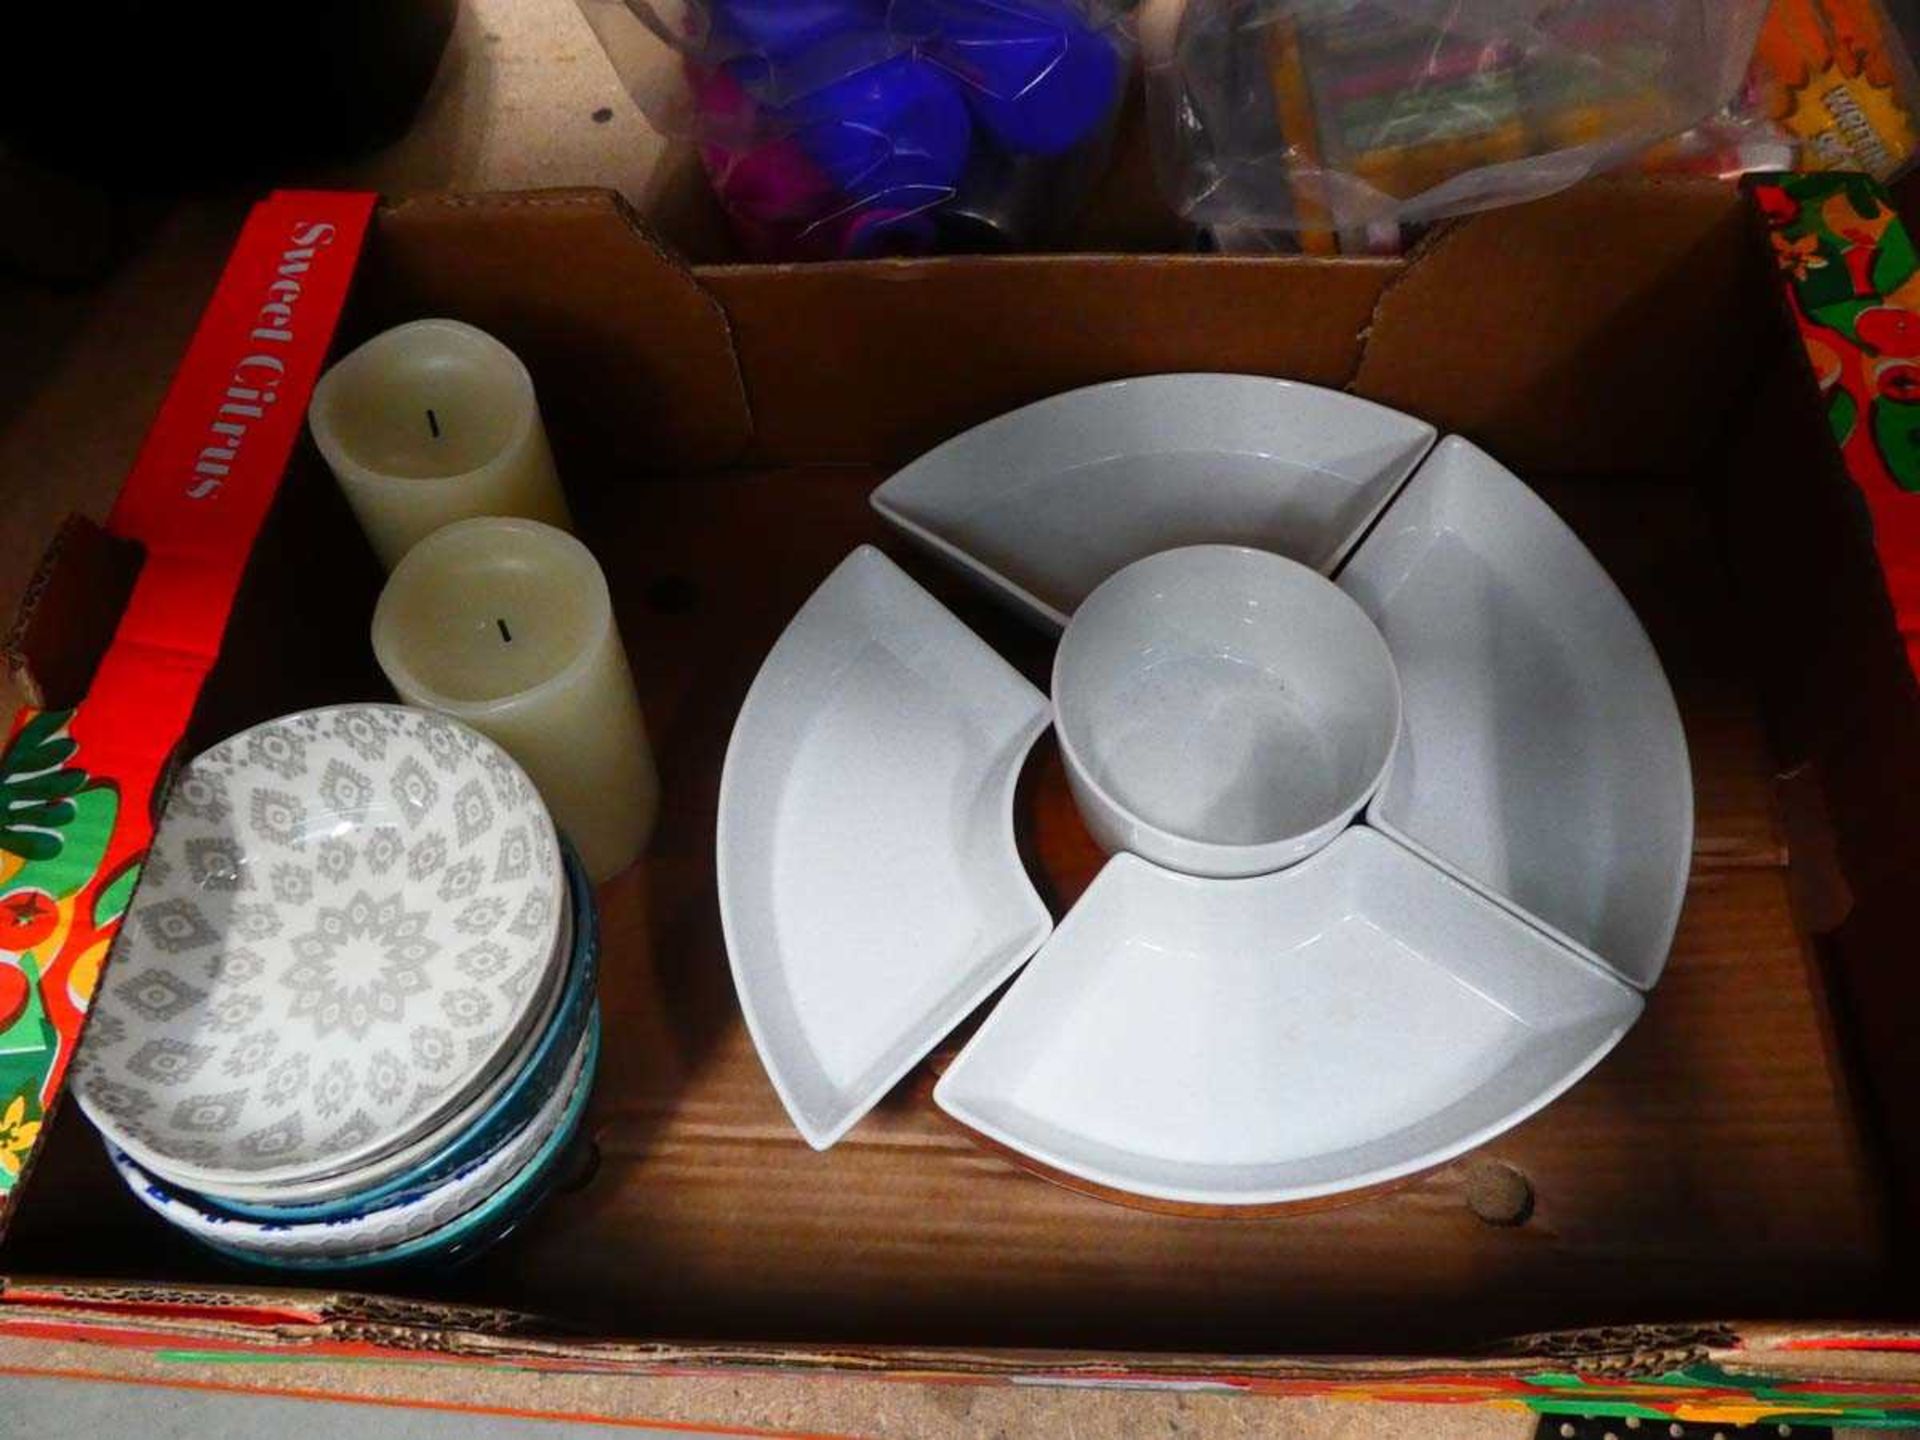 +VAT Box containing Lazy Susan, plus bowls and candles